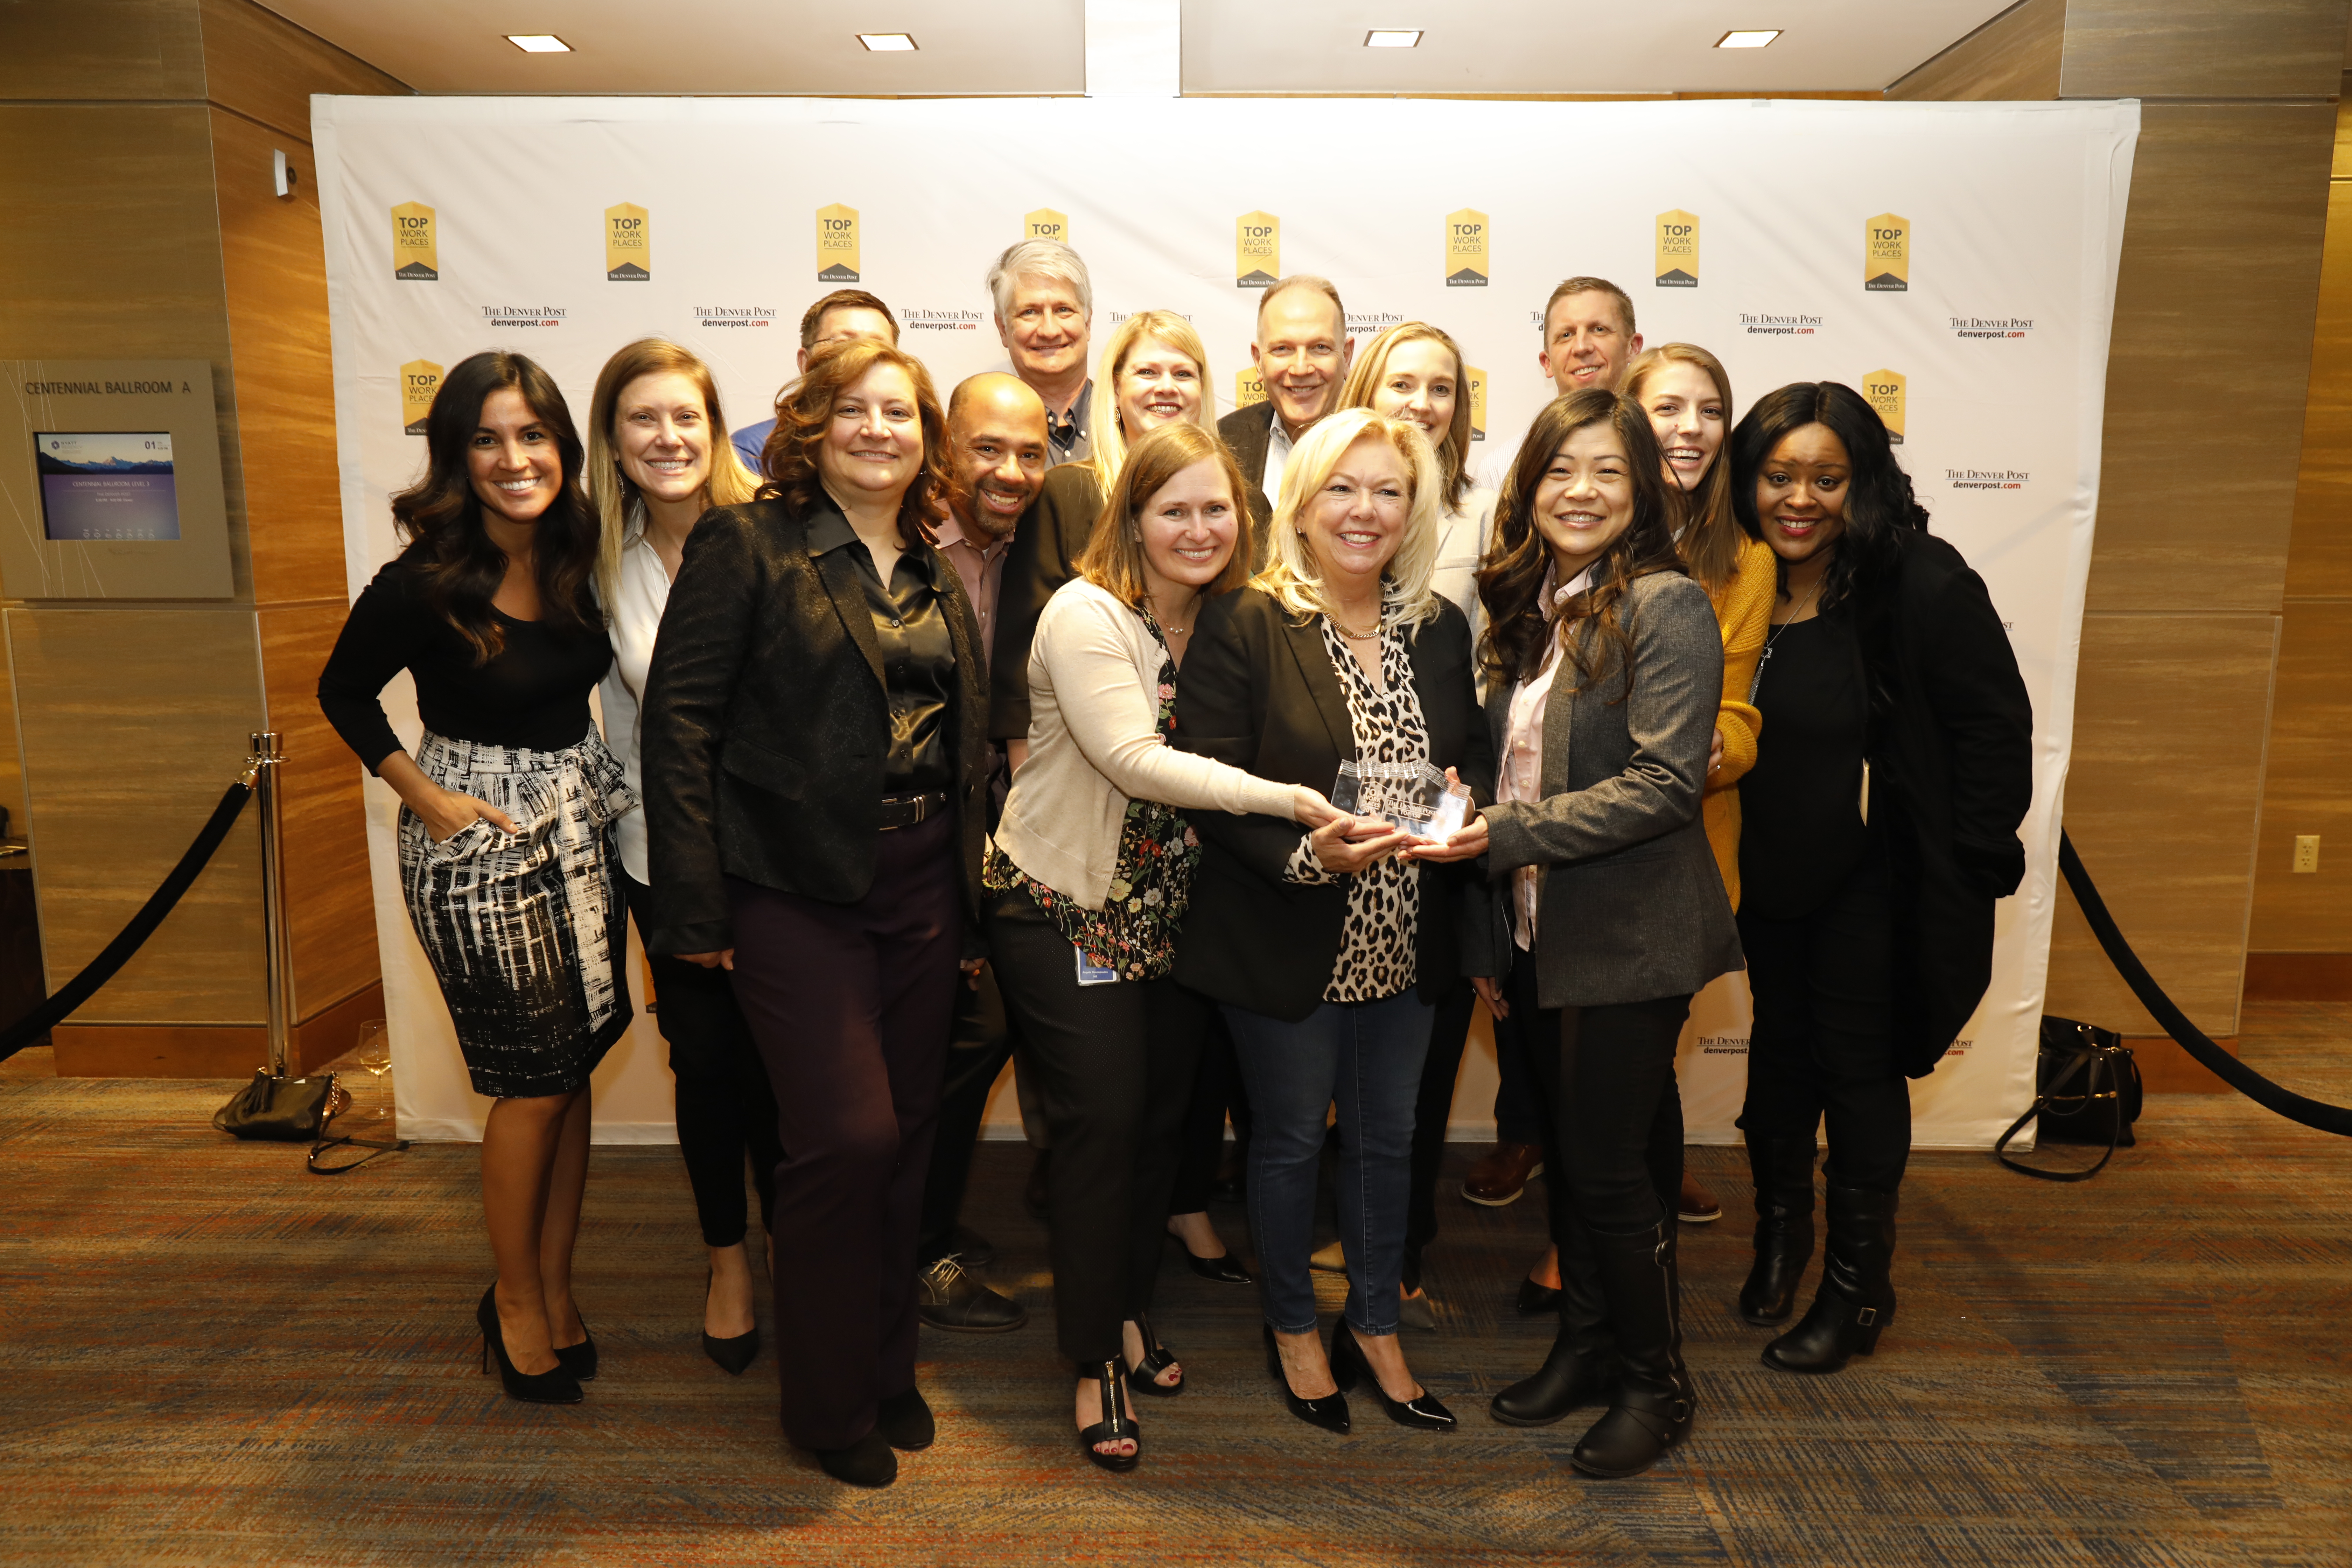 Aimco teammates celebrate Aimco's Top Workplace honor 
at the downtown event hosted by The Denver Post.
